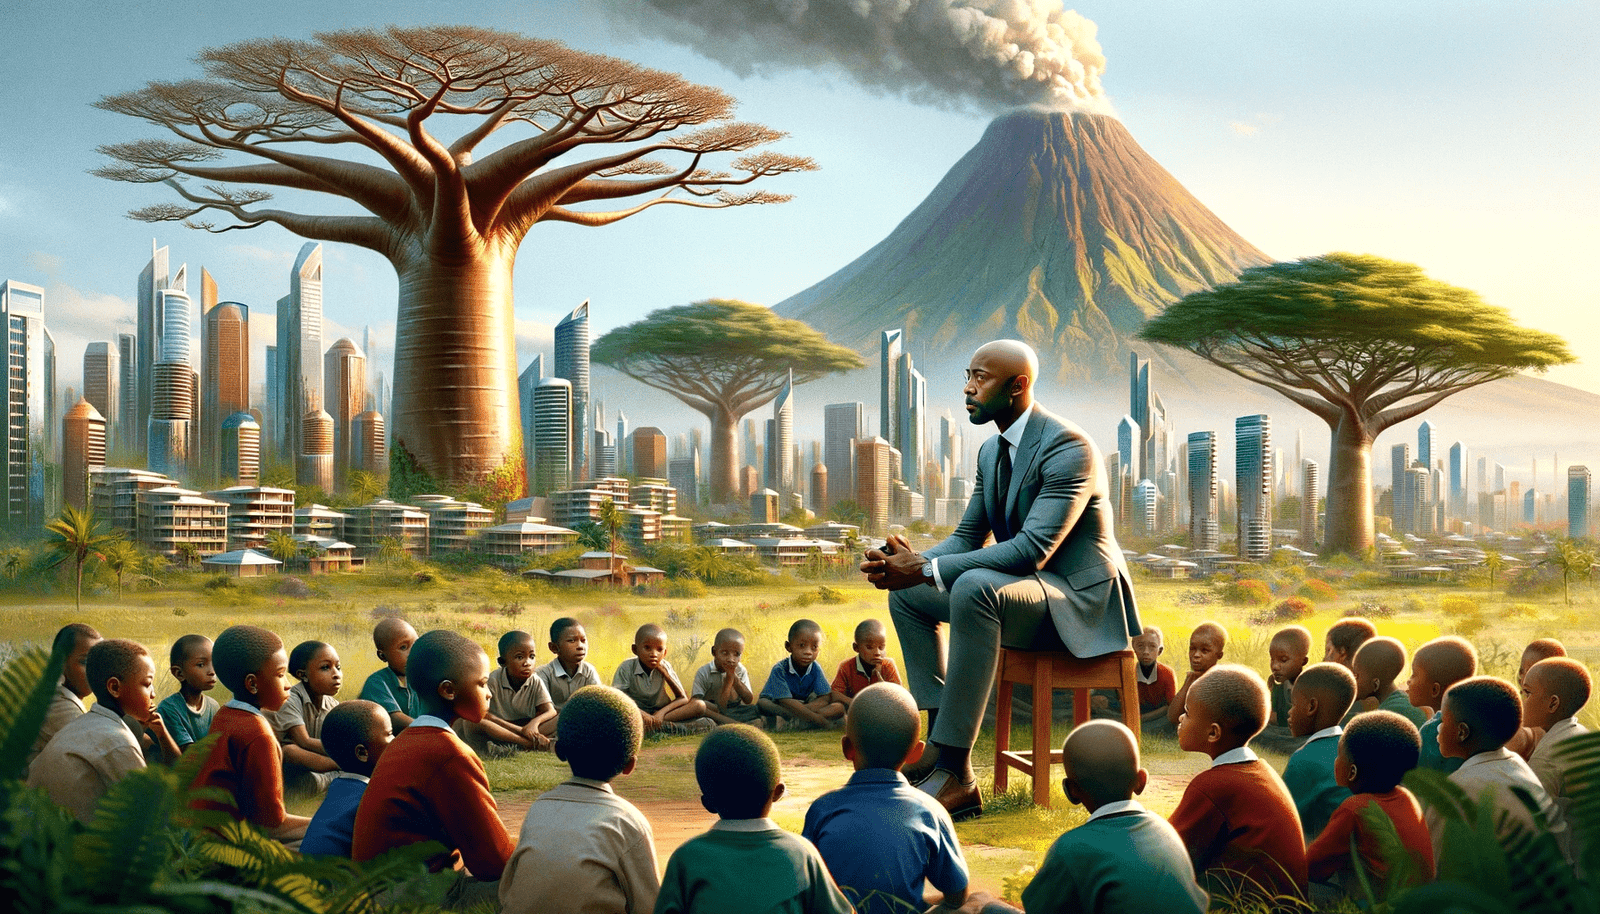 Dall·e 2024 01 06 13.16.00 Refine The Digital Artwork To Include Mr. Ekene A Bald Teacher In A Casual Business Suit Sitting With His Back Against A Baobab Tree. Surround Him W